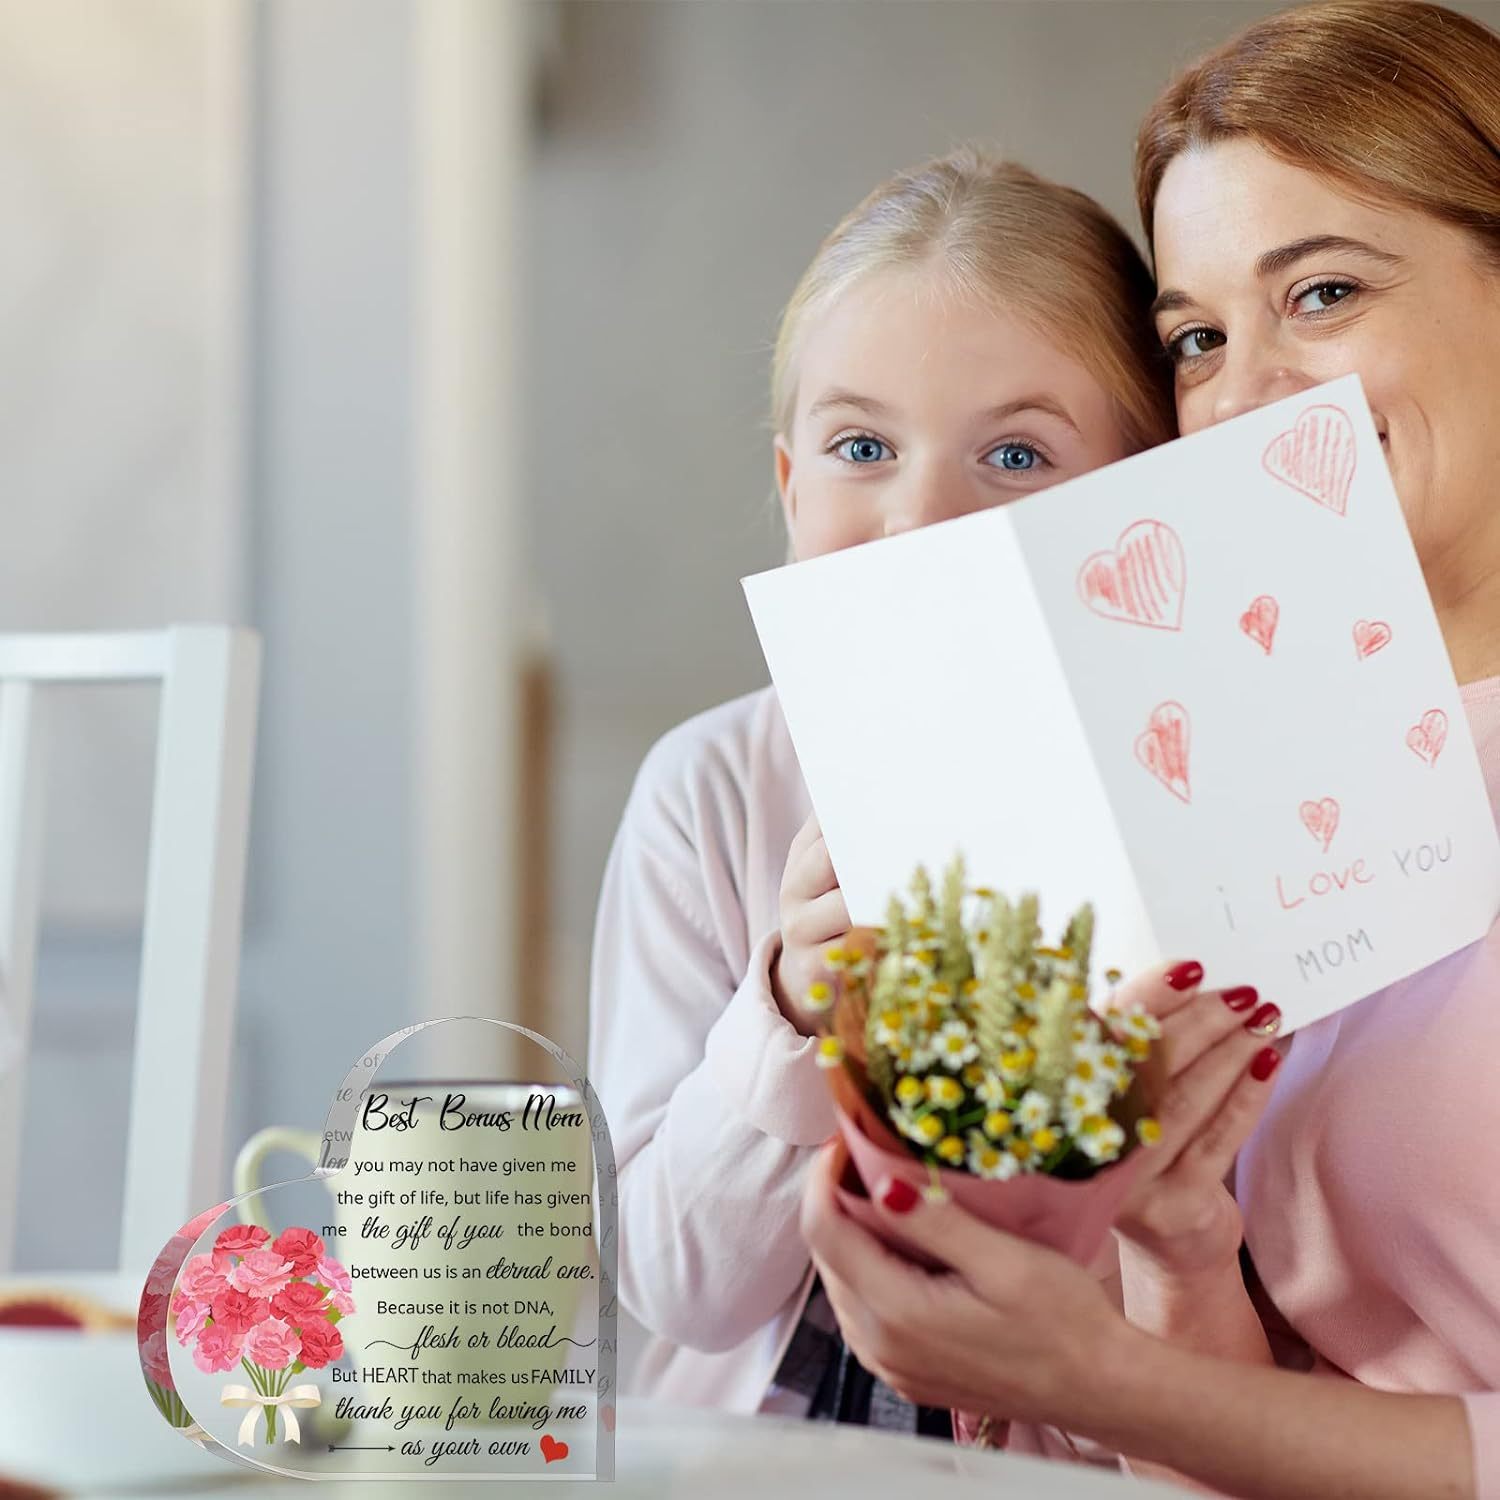 28 Mother's Day Gifts from Son - Thoughtful Gift Ideas 2021